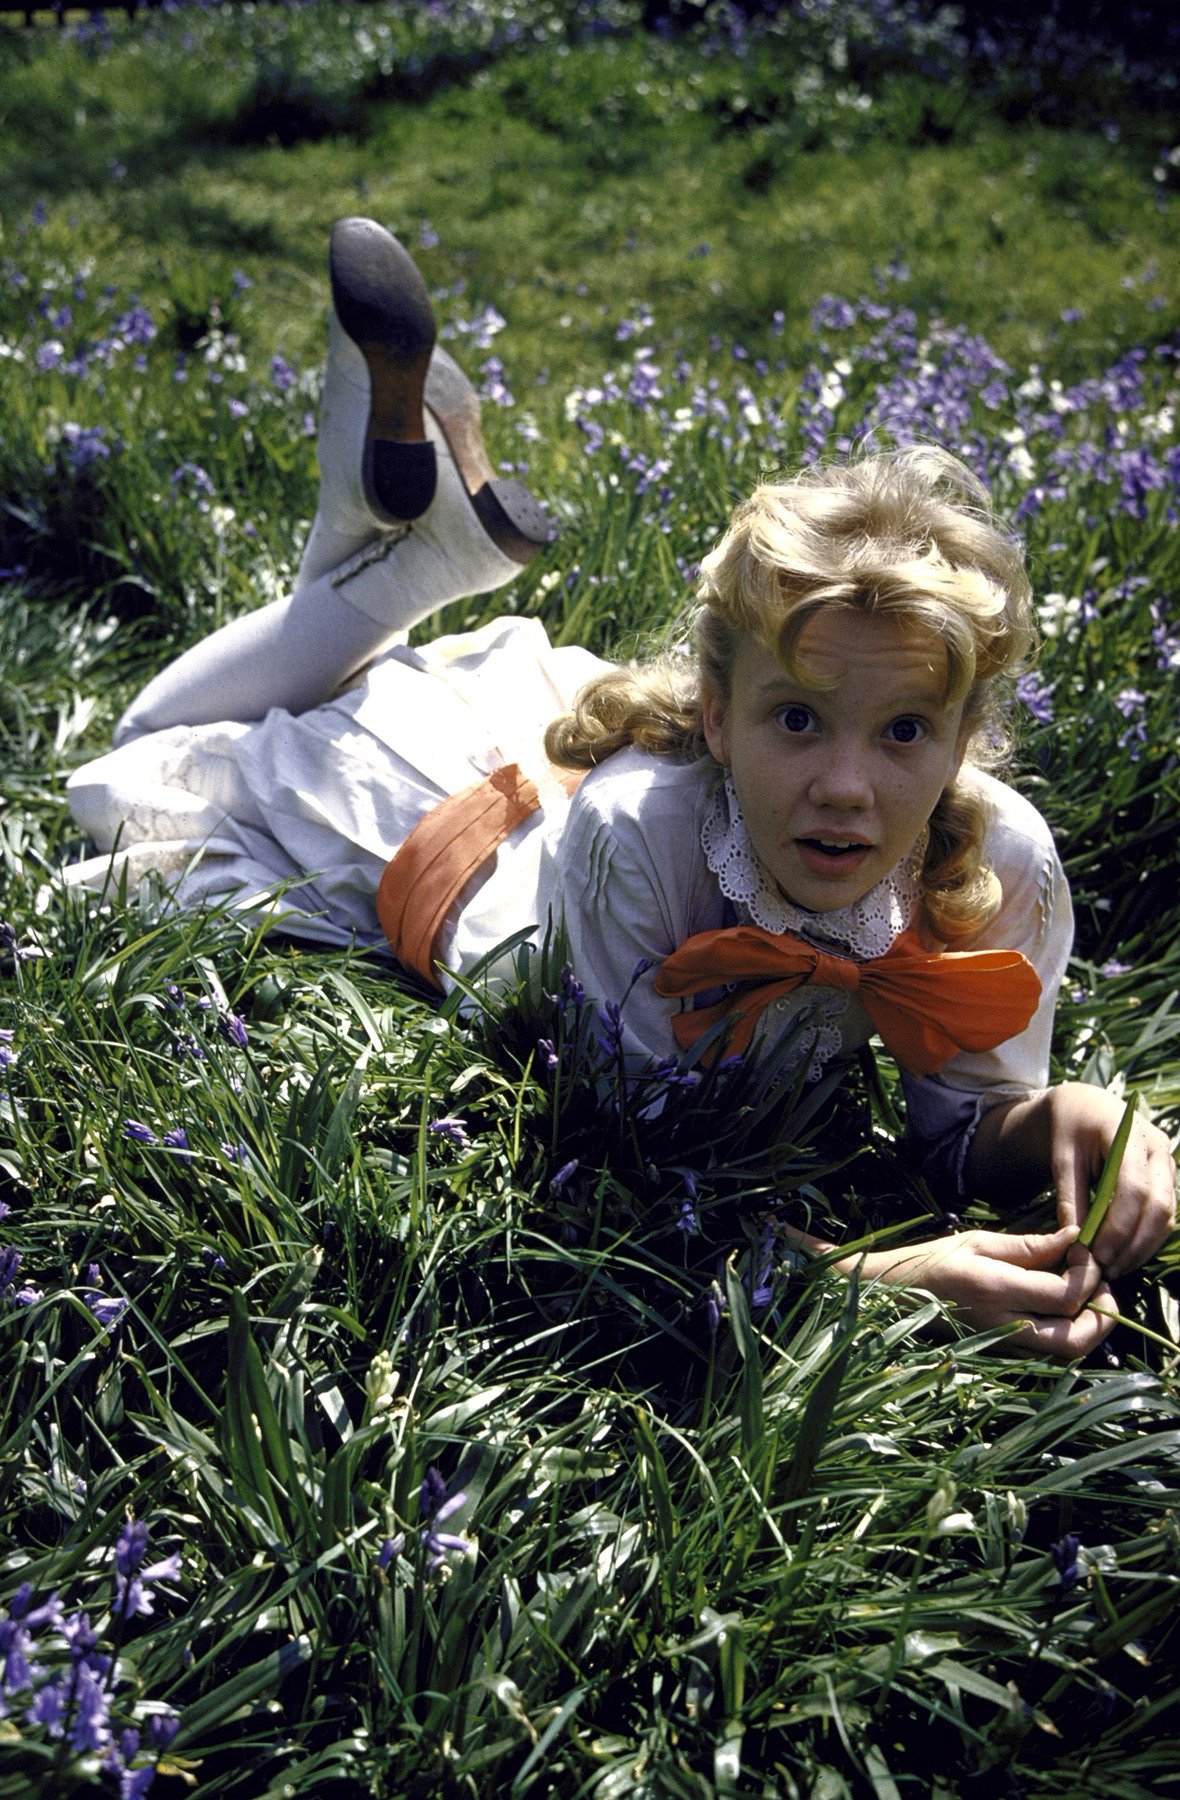 Happy 71st birthday to Hayley Mills, who was born April 18, 1946, in London. Here she is as Pollyanna. 